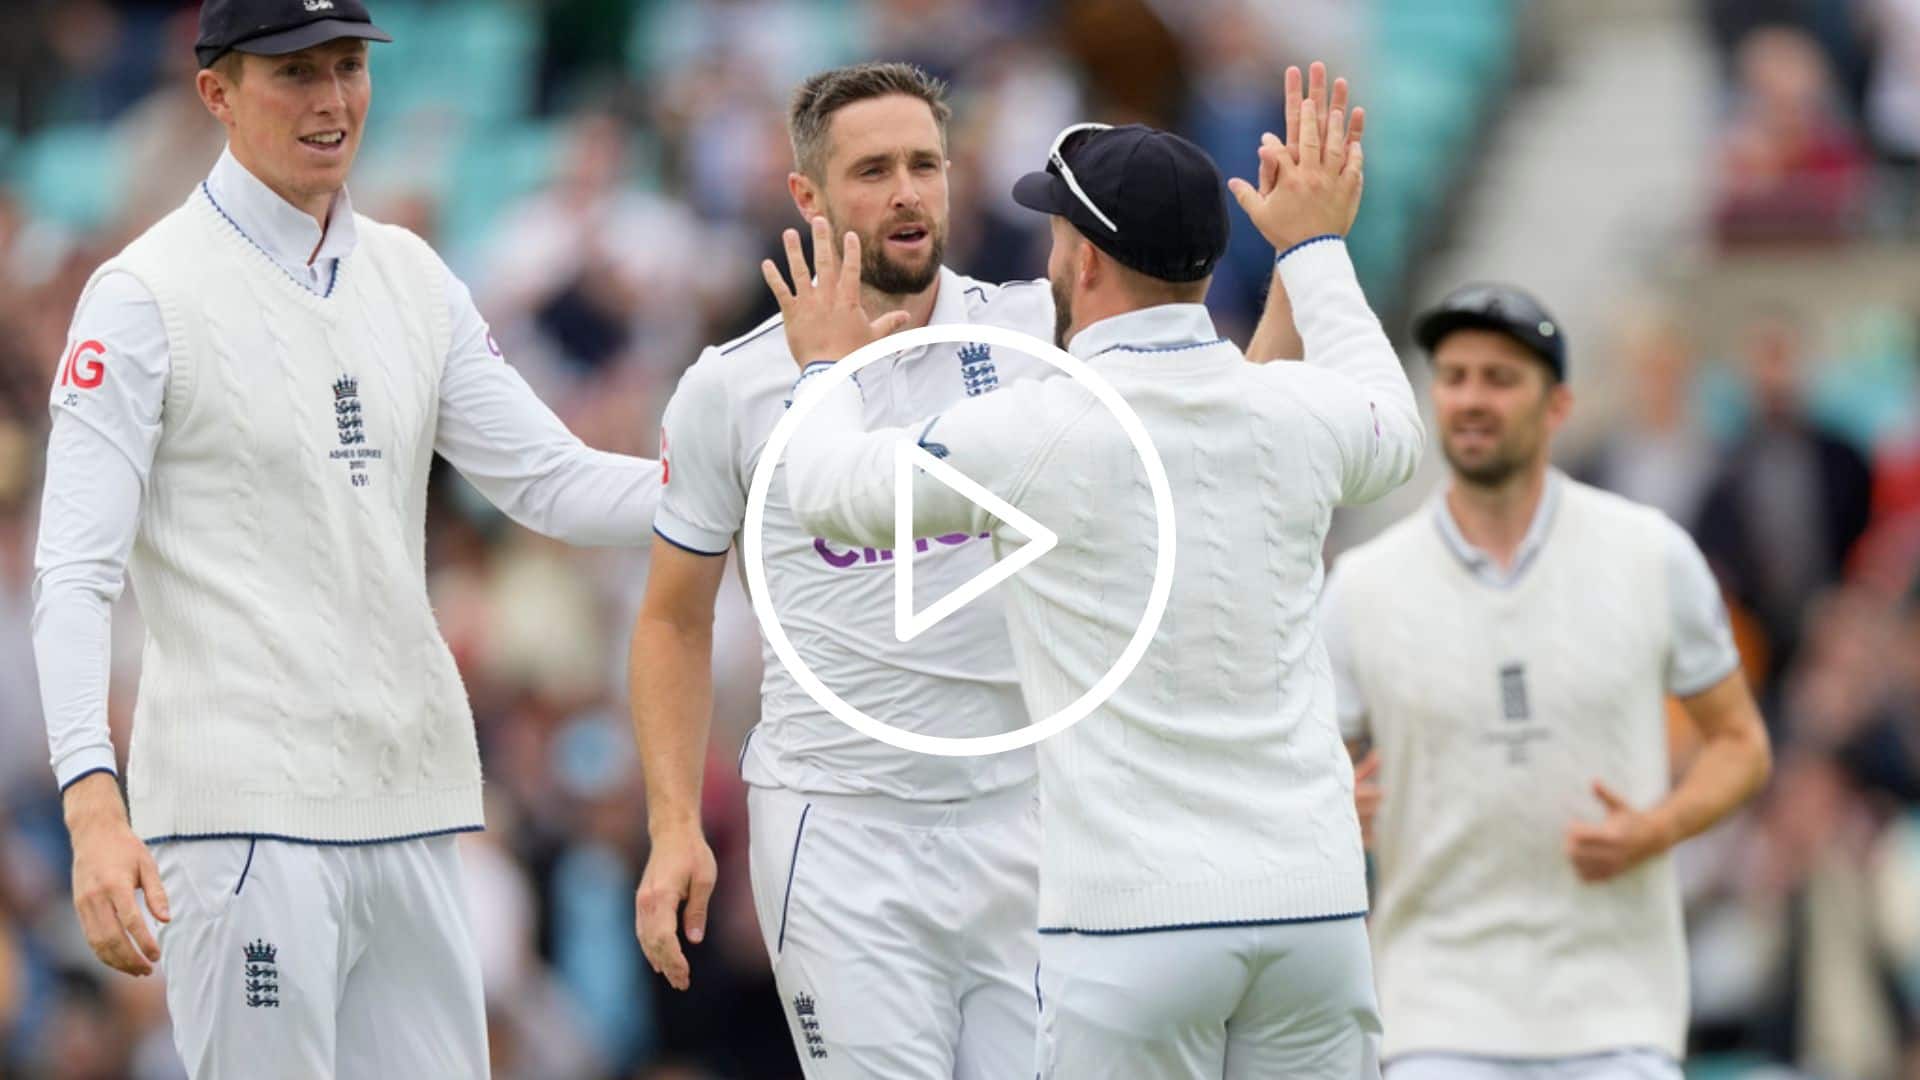 [Watch] Chris Woakes Sends Both Openers Back With Snoters; Mark Wood Follows With Another Beauty